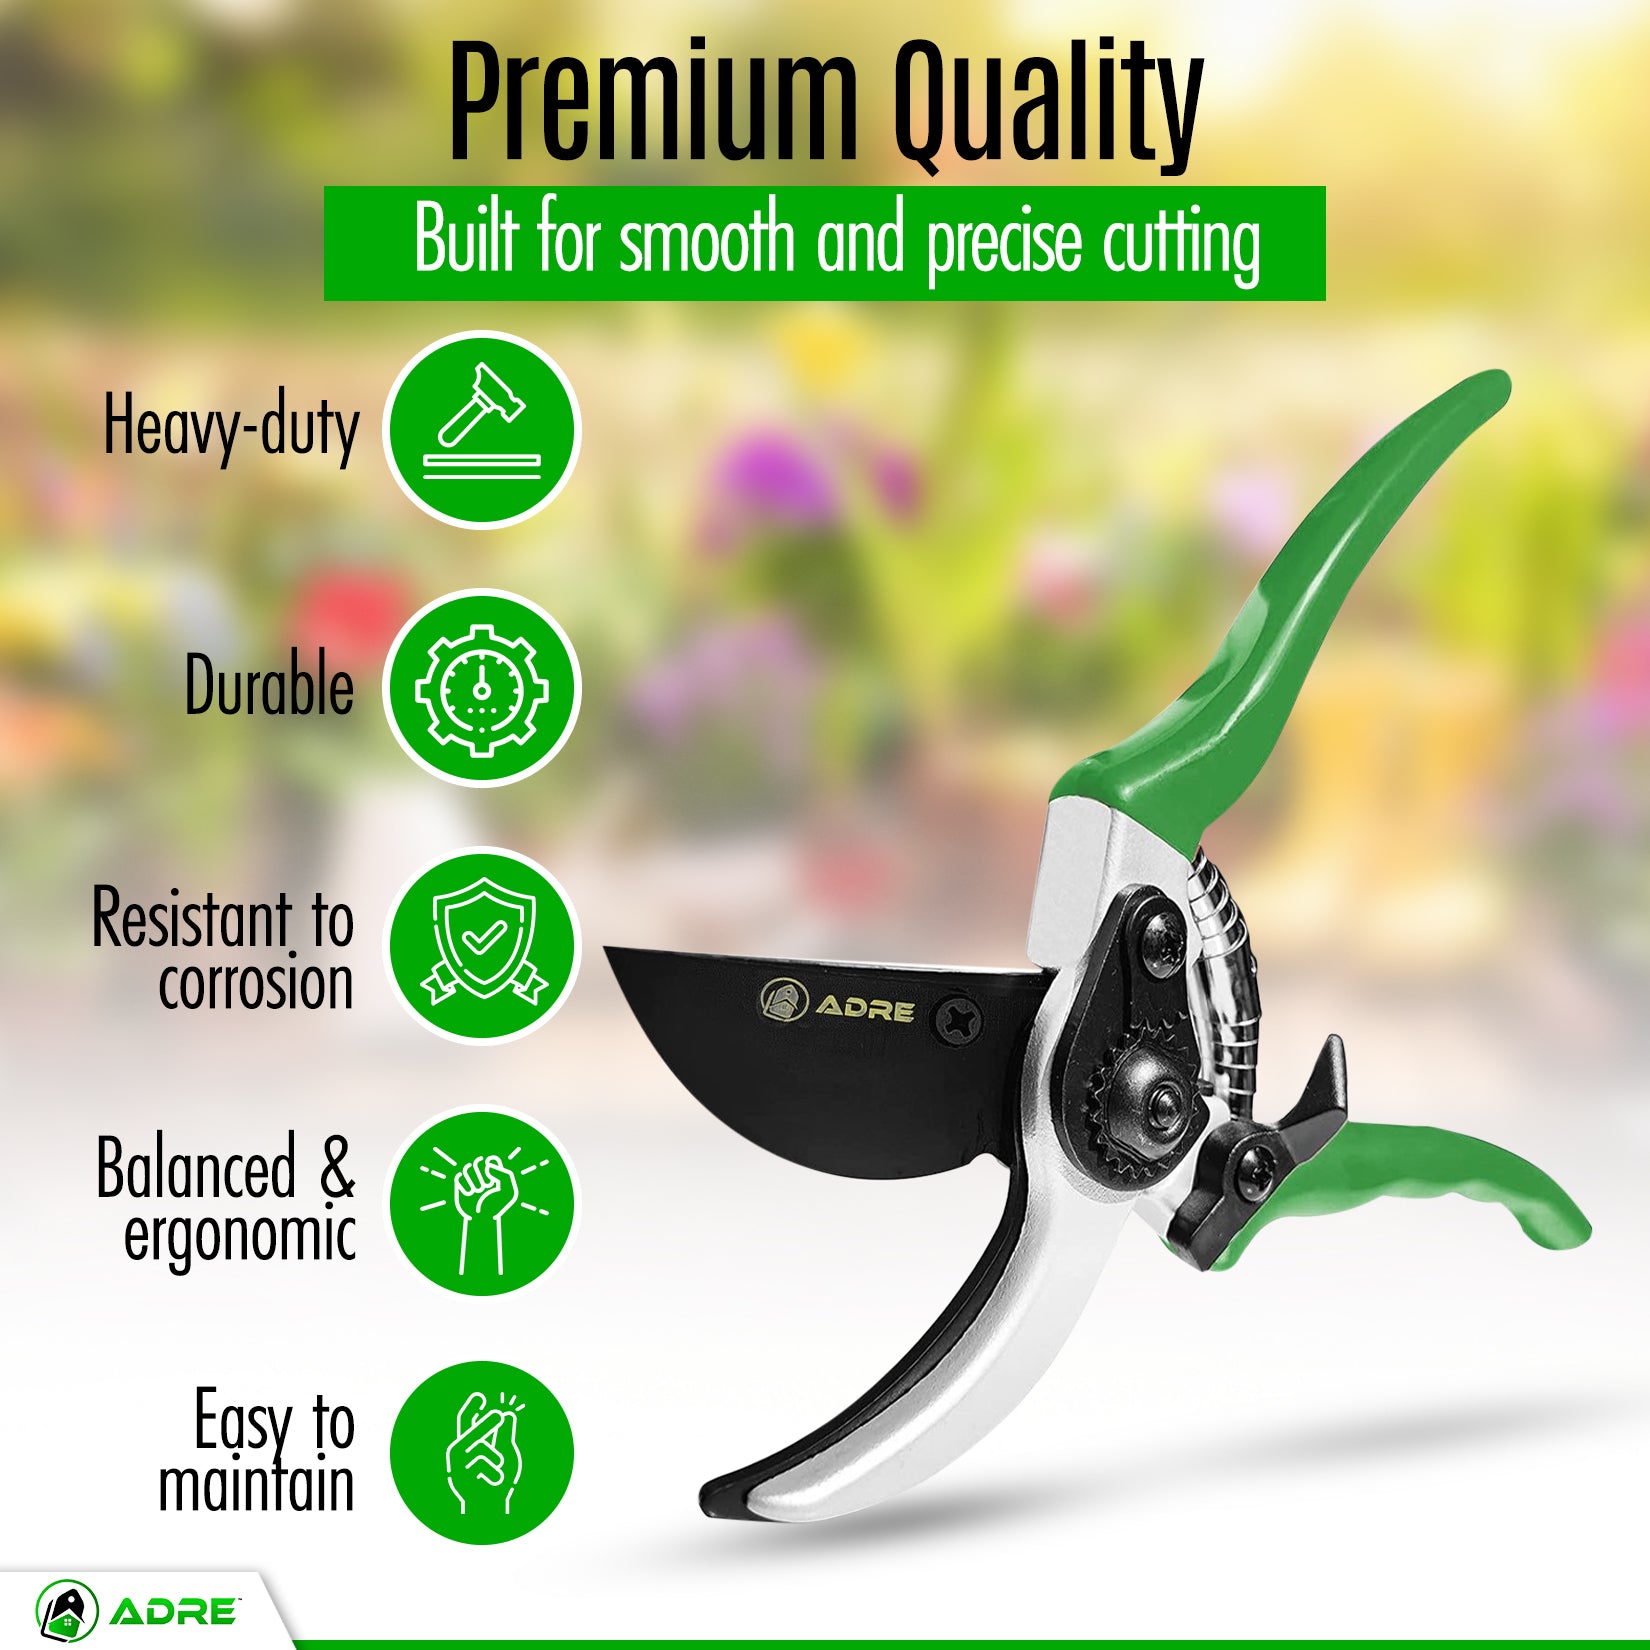  GROWNEER Bypass Pruning Shears, 8 Inch Teflon Coated Plant  Scissors, Hand Pruners for Gardening, Garden Clippers Handheld, Hedge  Trimmers with Sap Groove and Lanyard for Branch, Flower, Bonsai : Patio